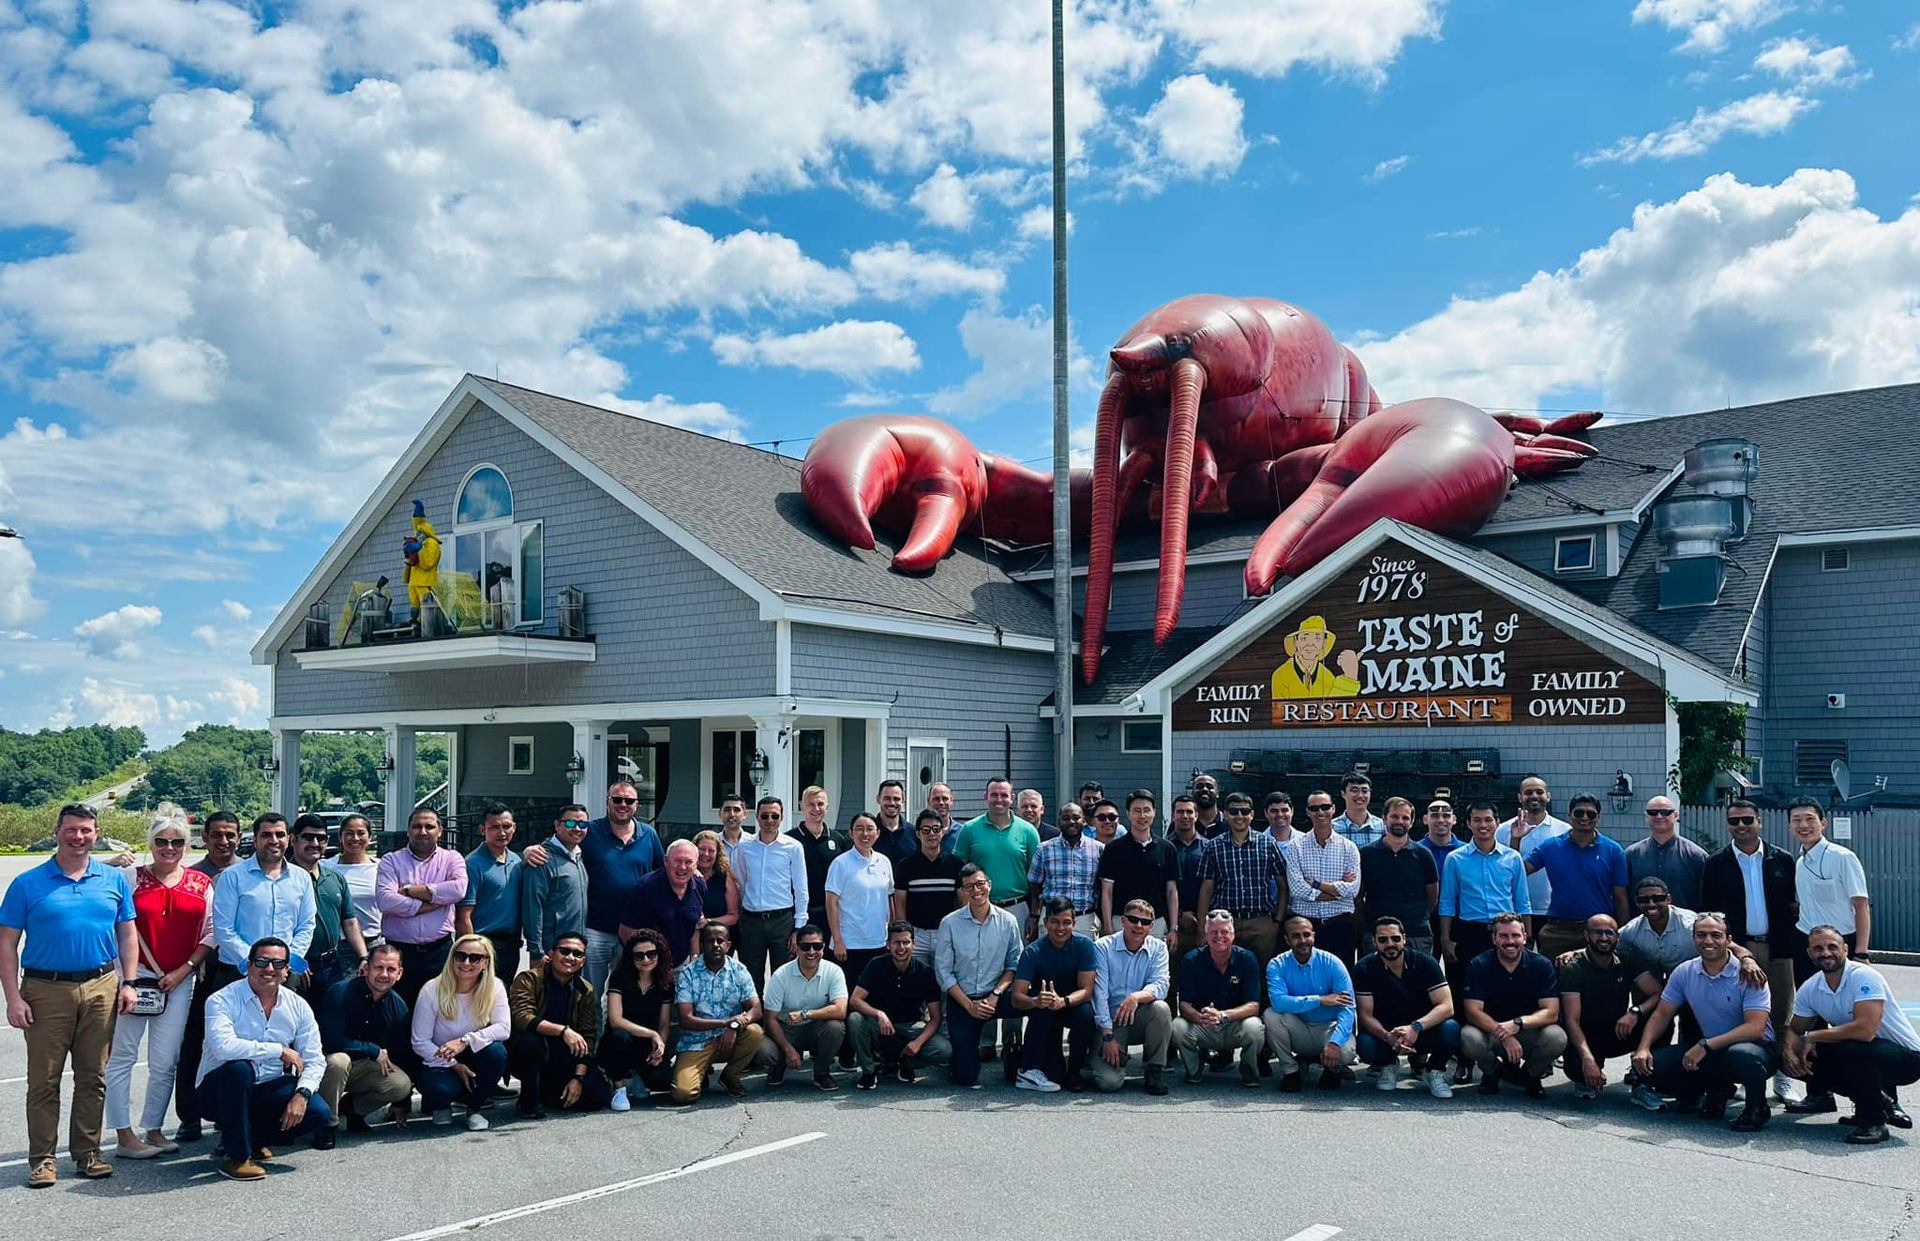 World’s Largest Lobster Roll Commercially Available, world record in Woolwich, Maine
